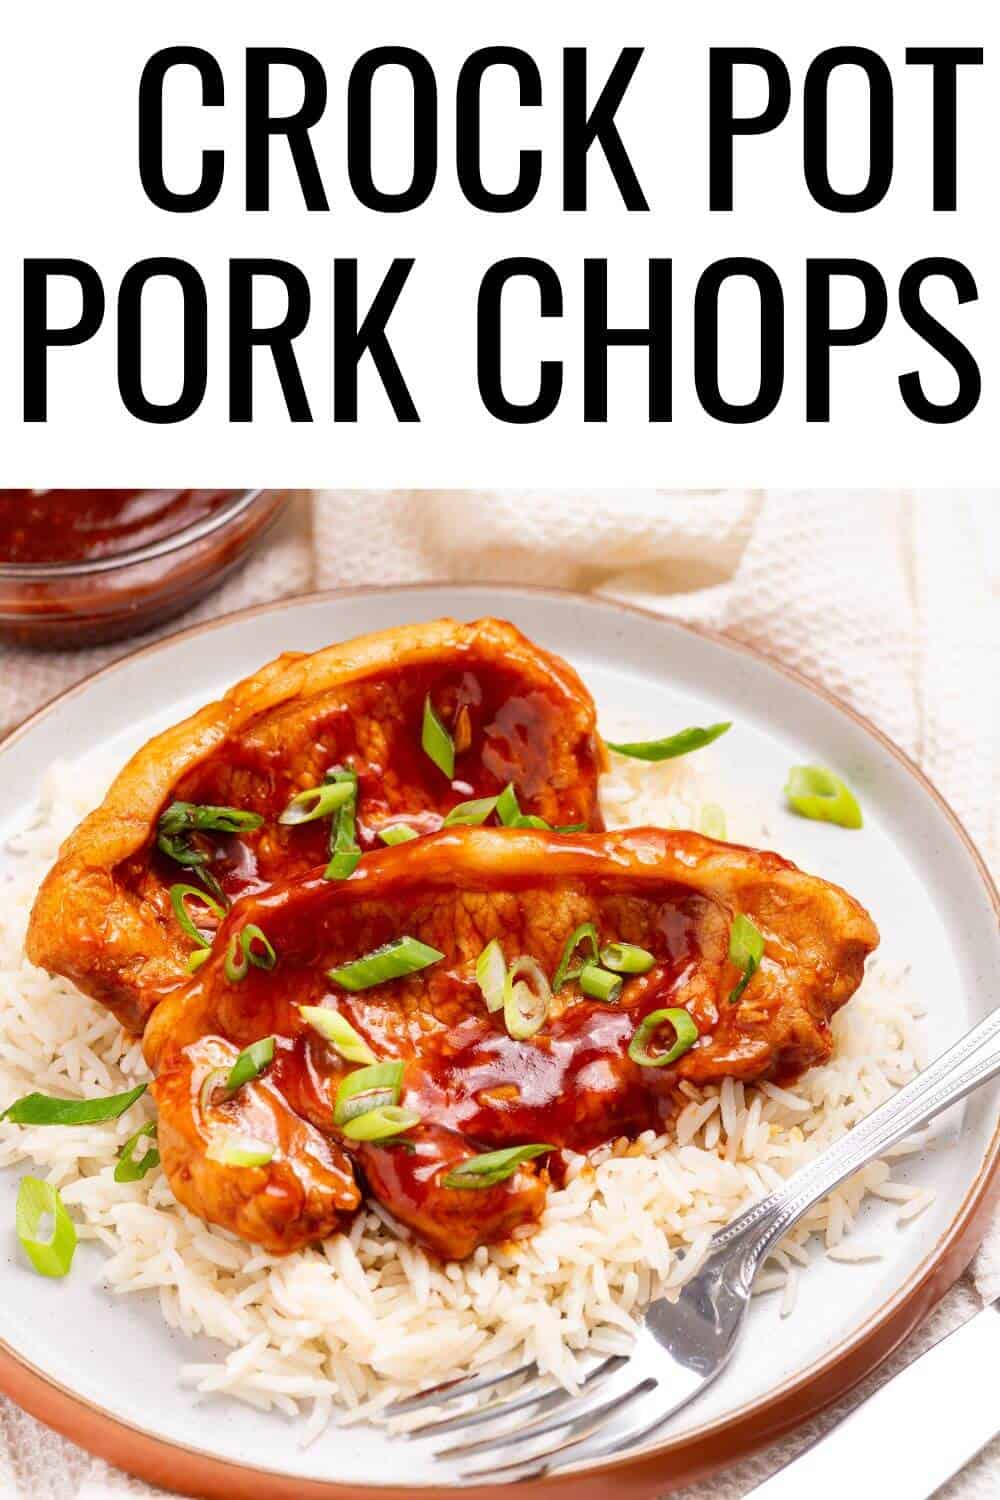 Crock pot pork chops on a plate with rice.